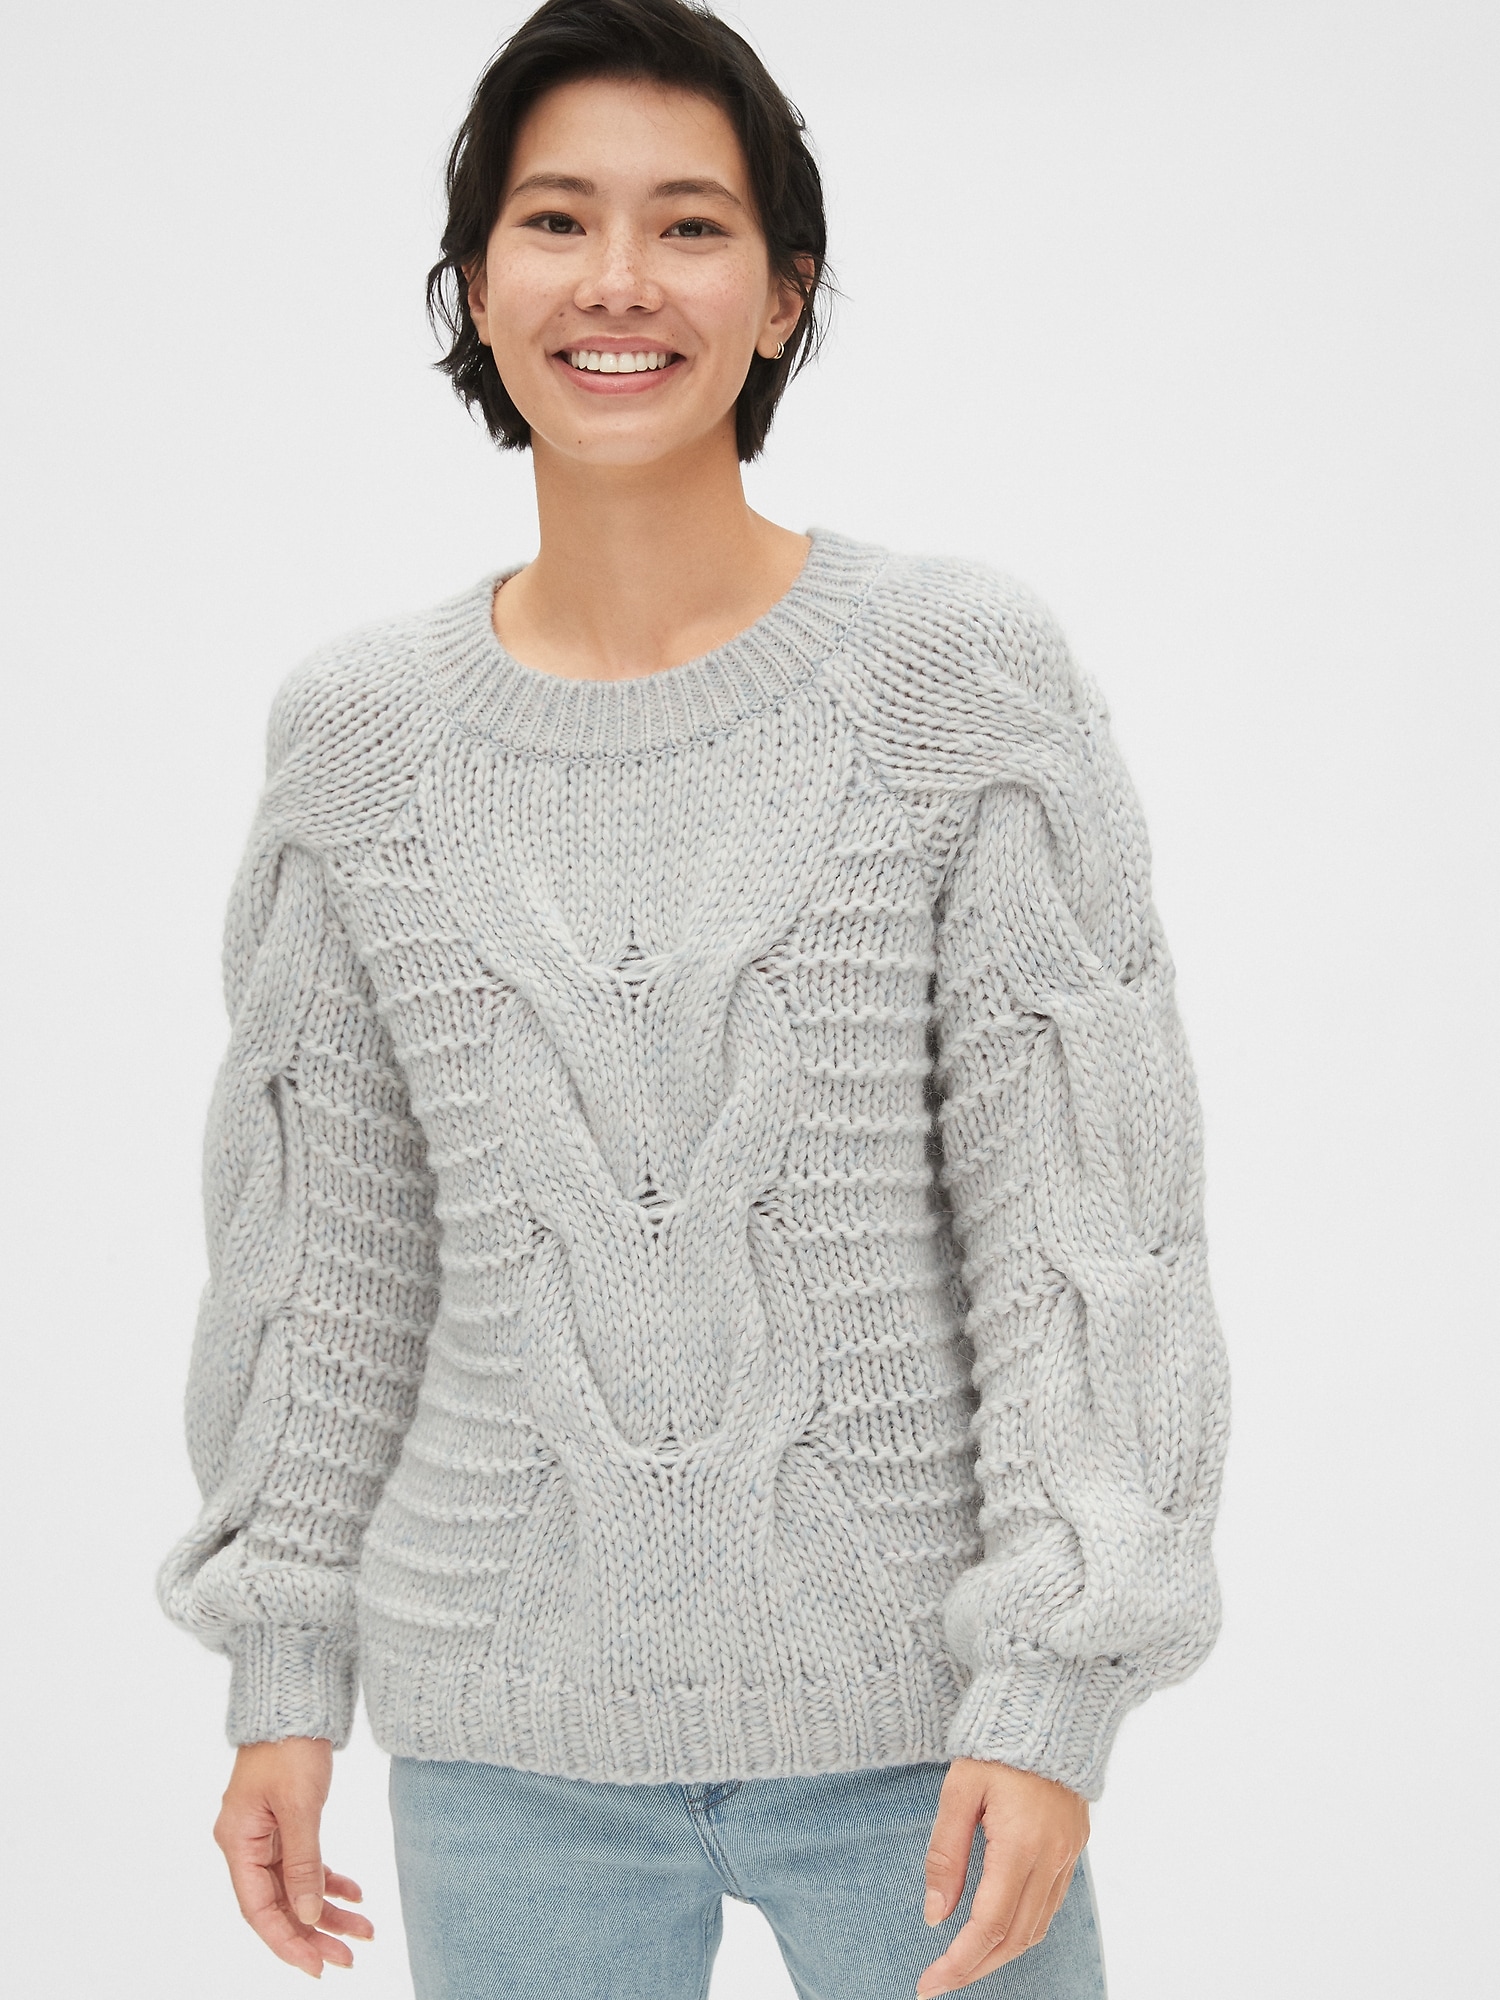 Gap Women's Cable-Knit Sweater